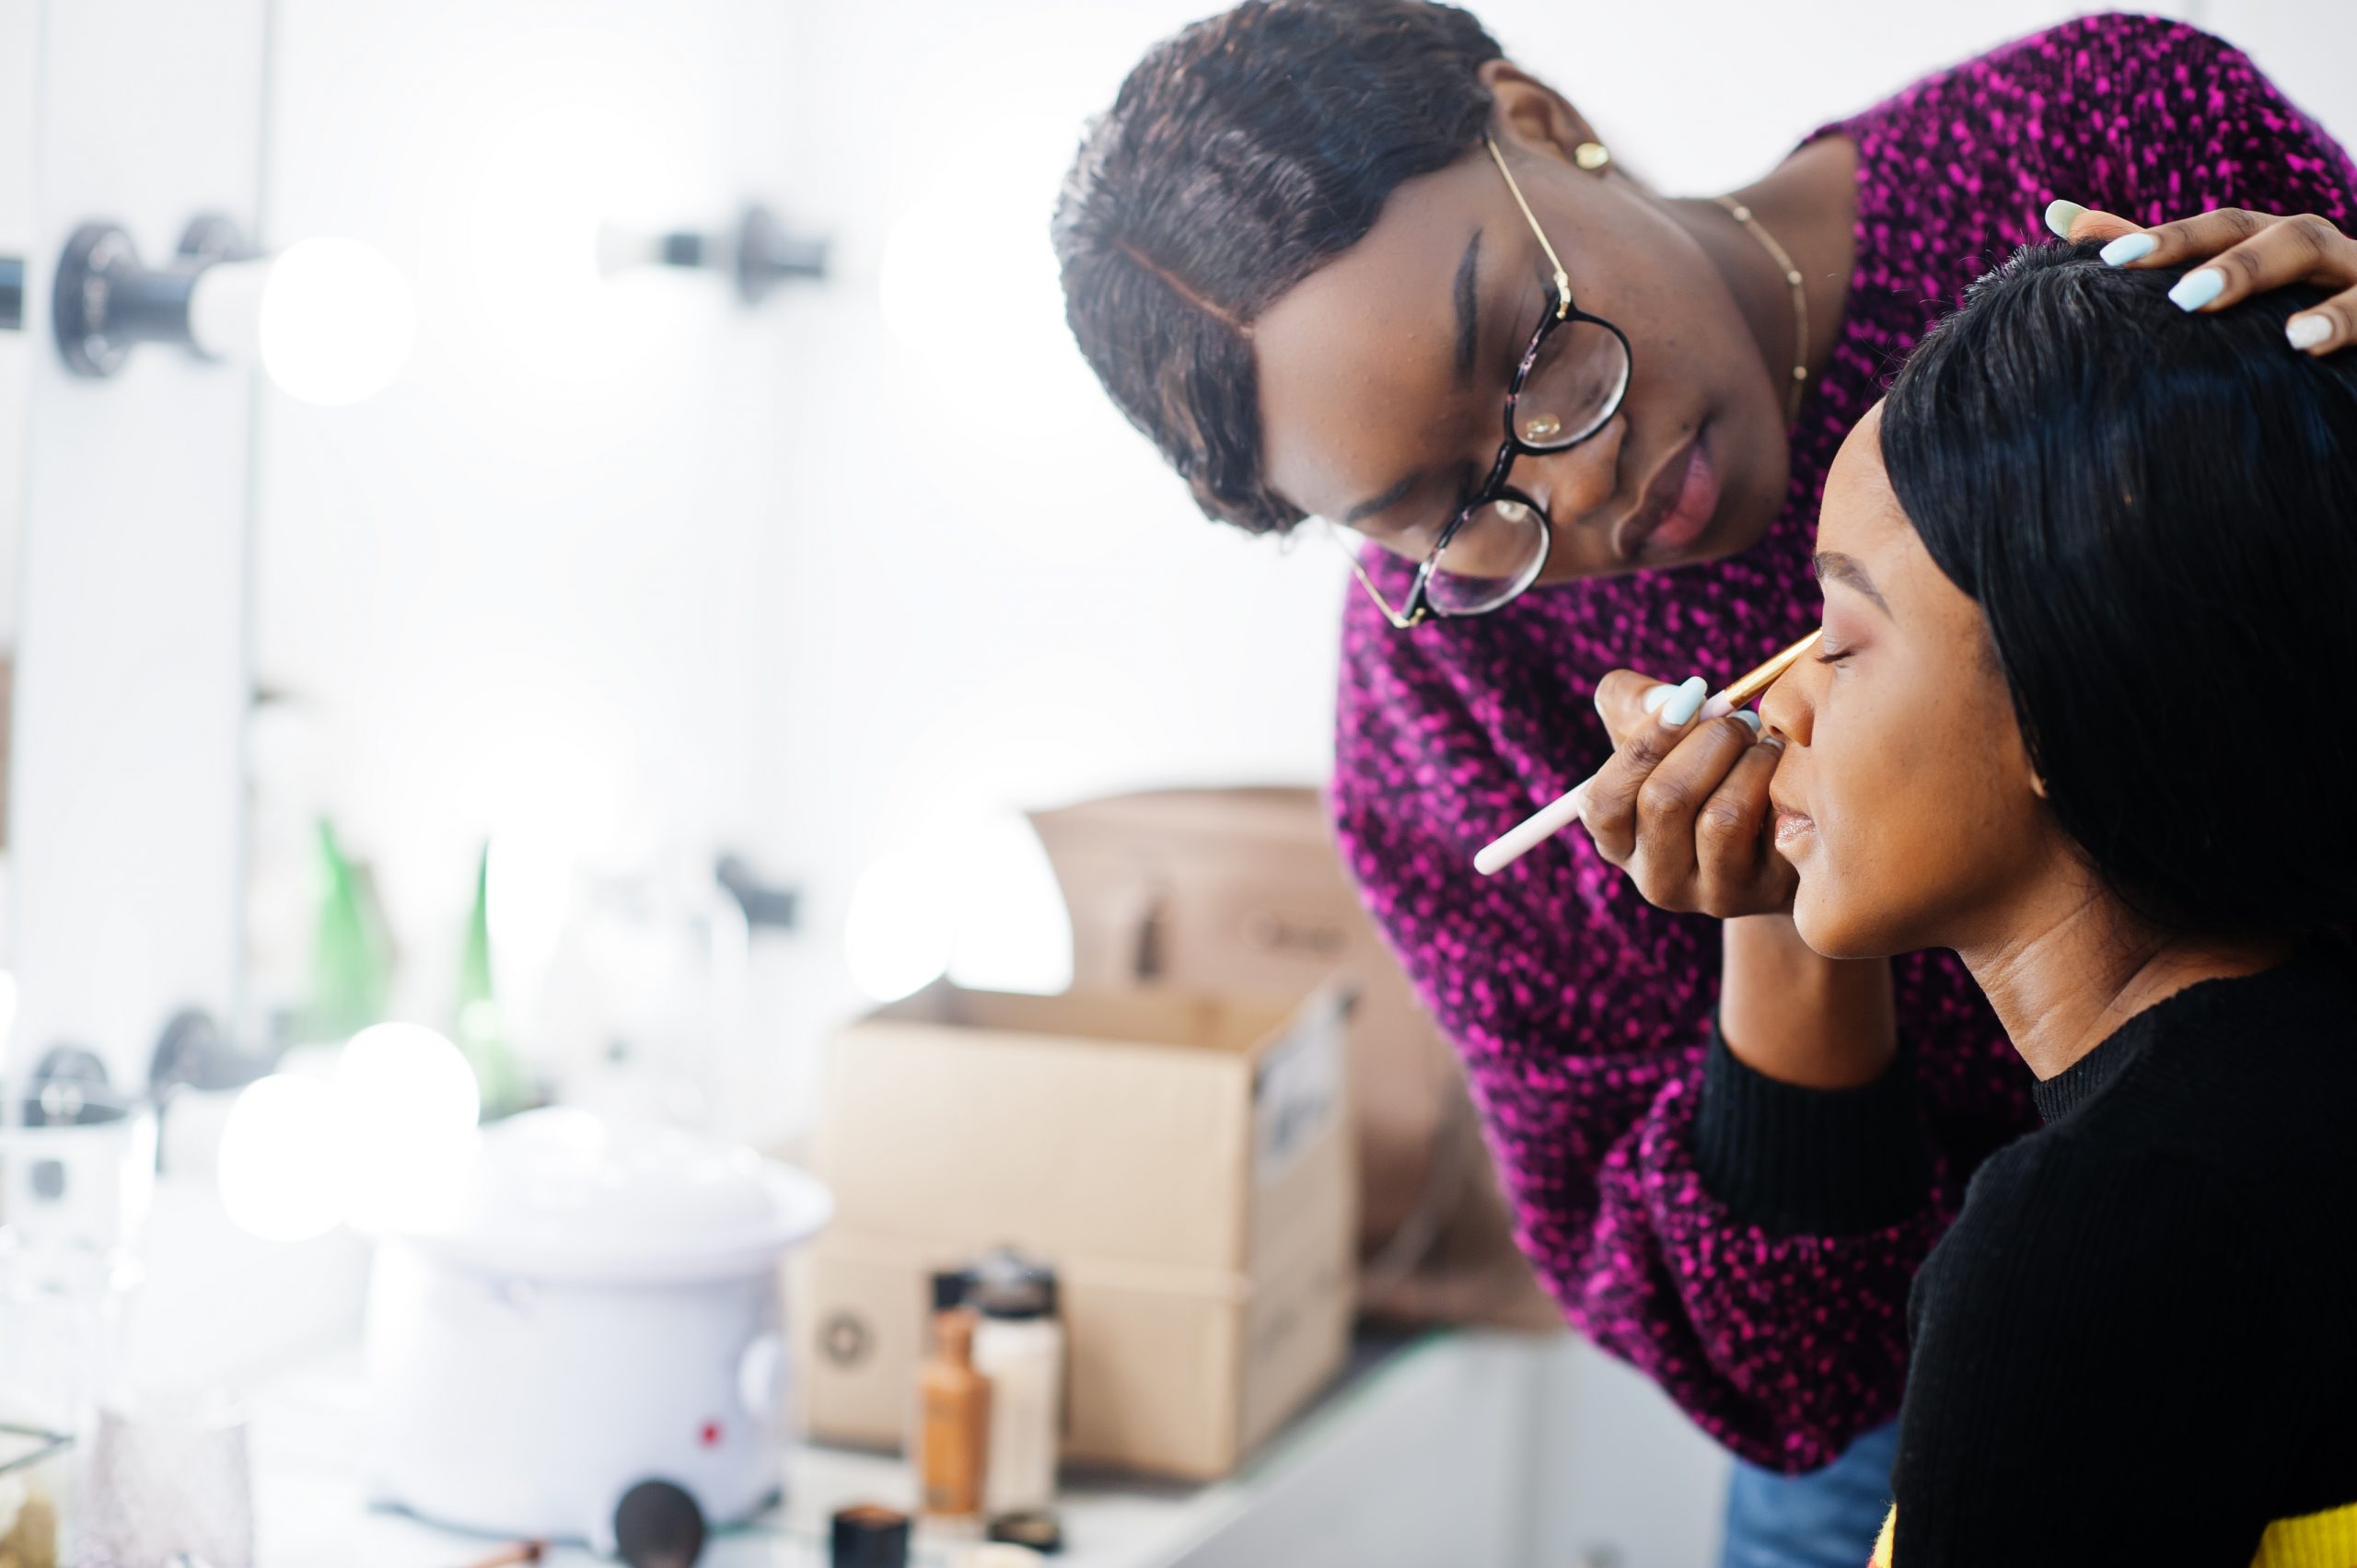 sephora-launches-$100,000-grant-for-black-entrepreneurs-in-beauty-sector